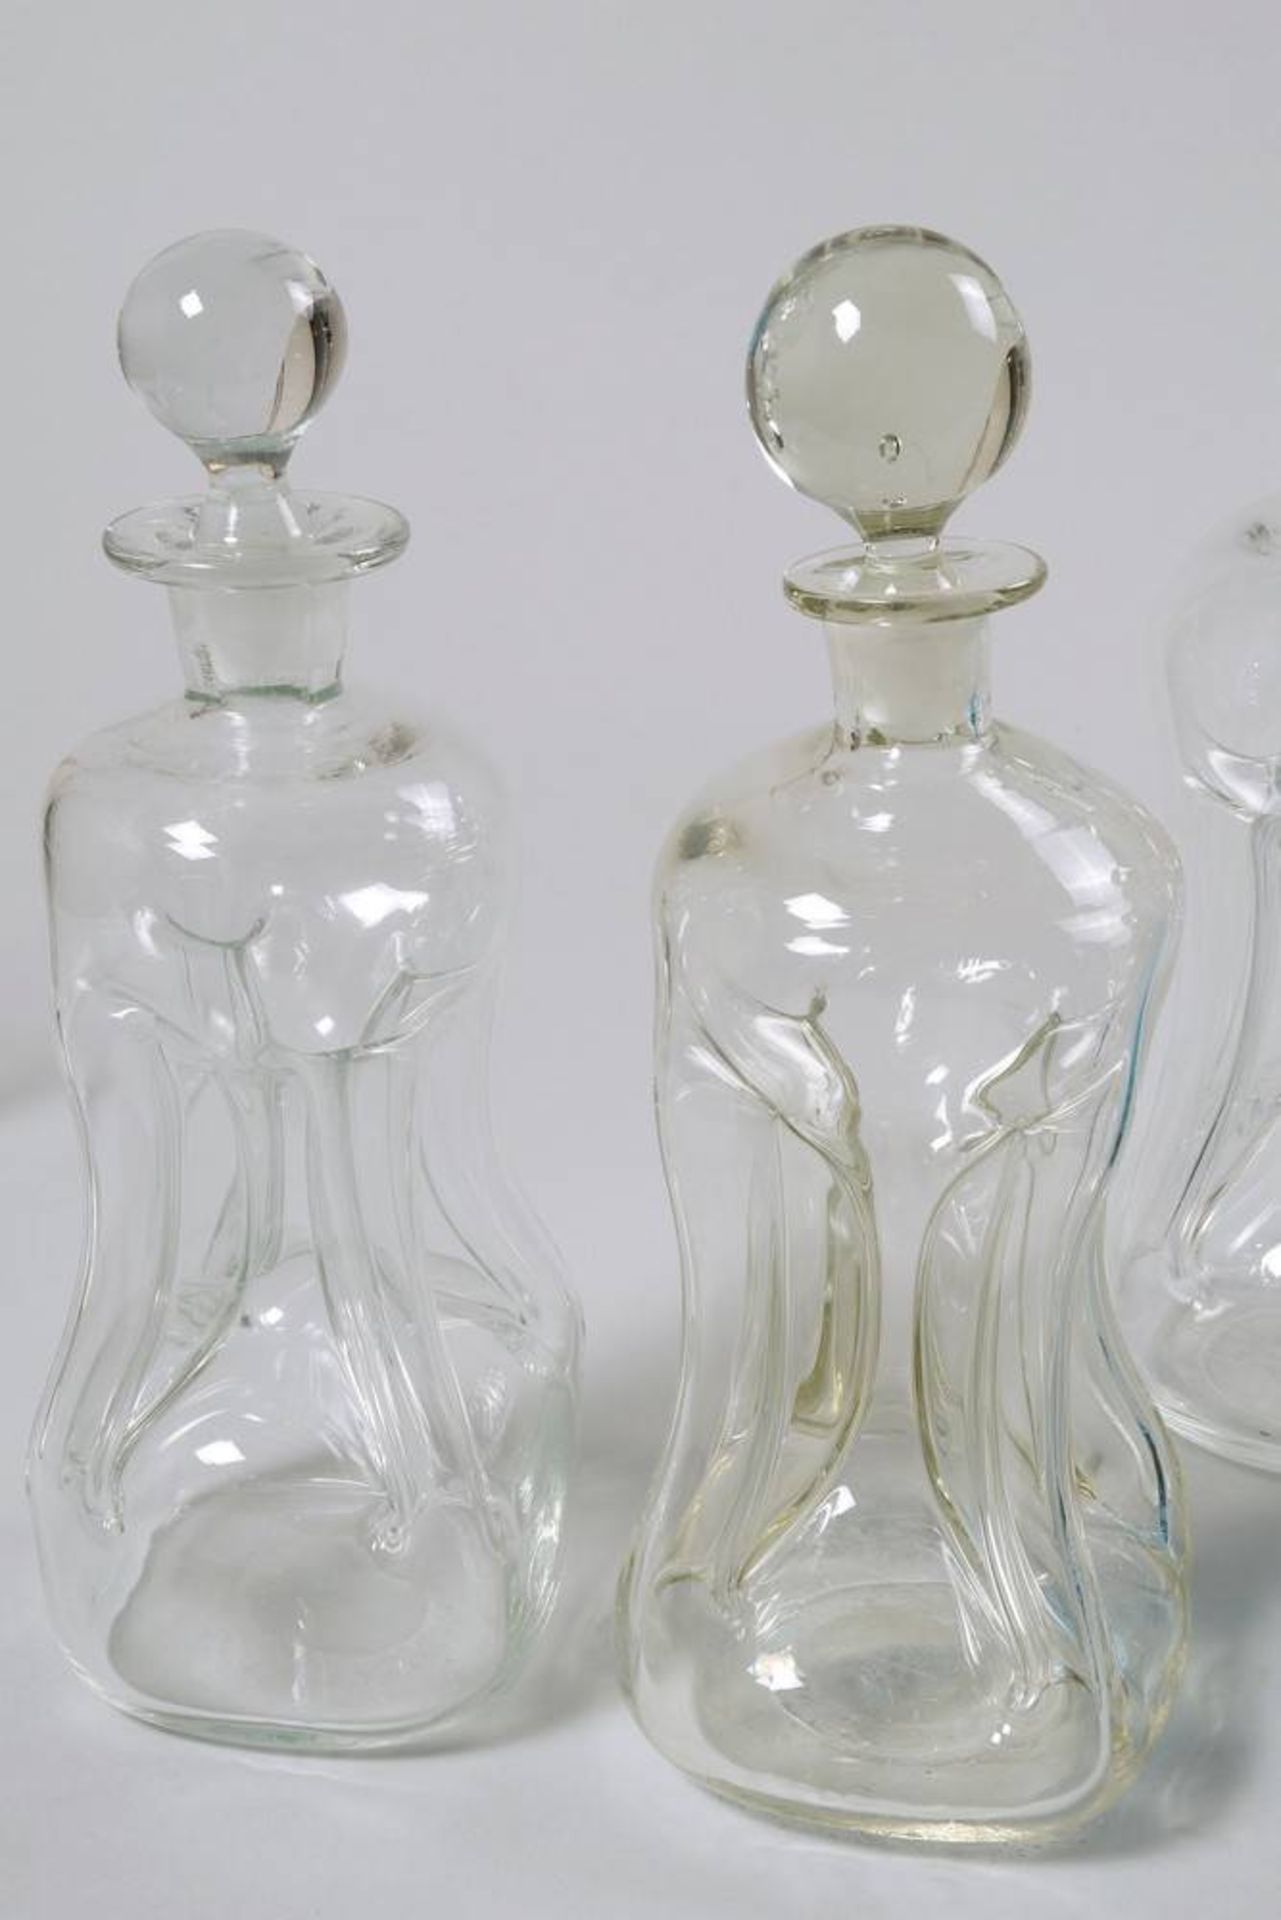 Collection of Decanters 6 pieces, Scandinavia, 20th C., clear and blue glass, H: 21-29cm, 1 - Bild 3 aus 4